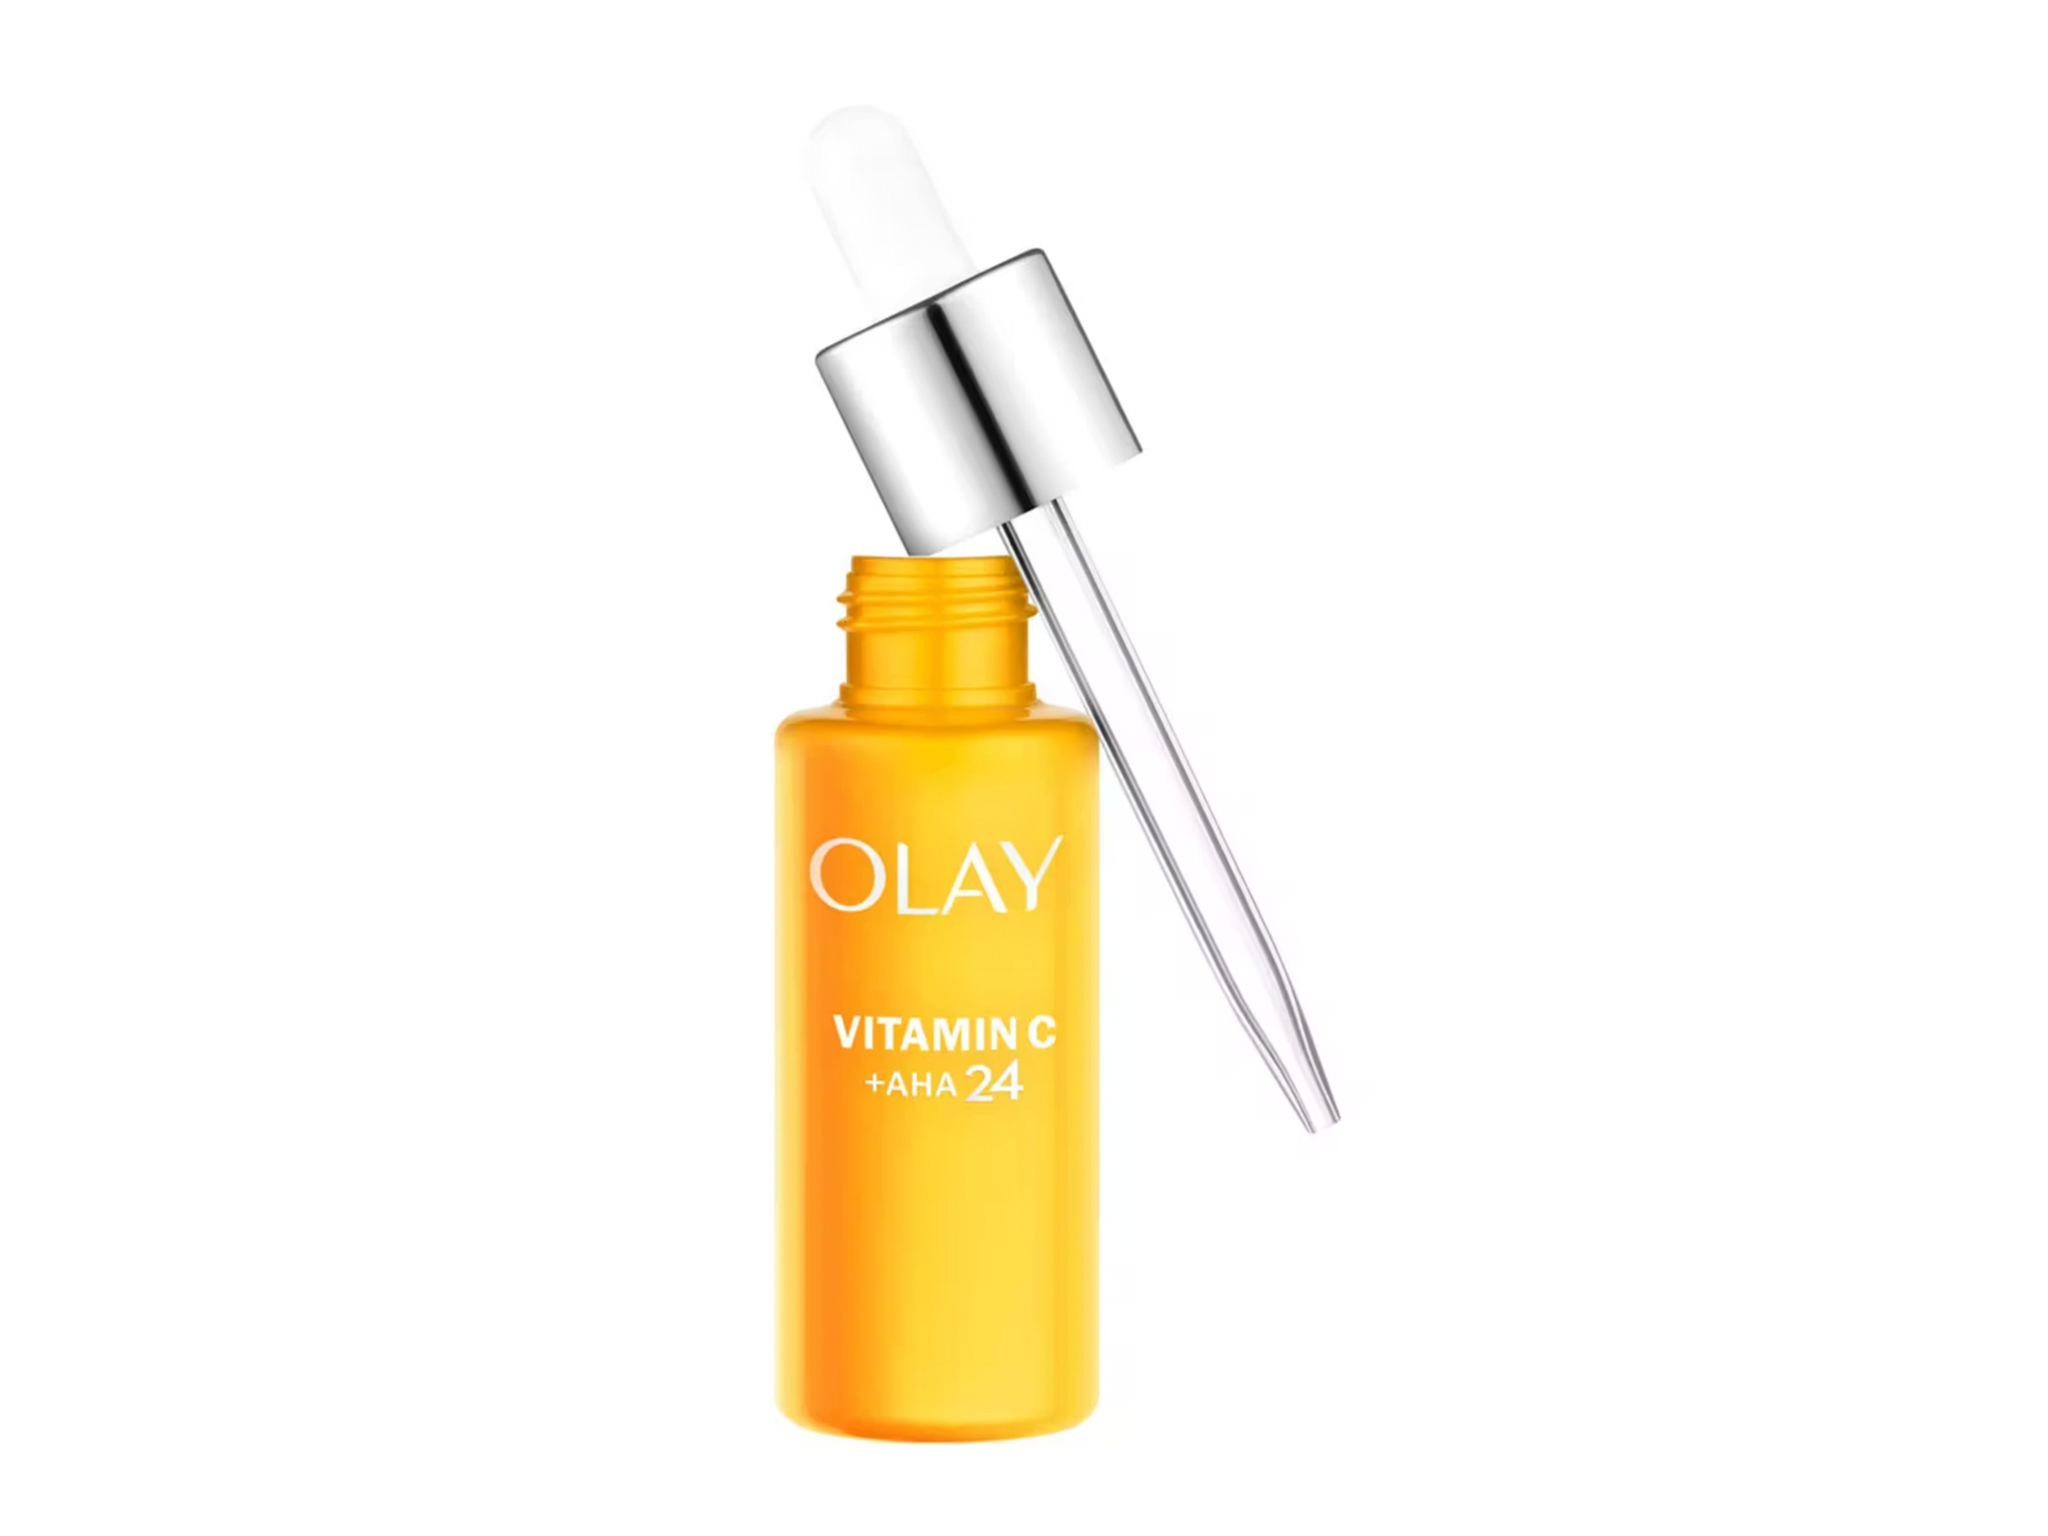 Olay vitamin C + AHA 24 day gel serum for bright and even tone